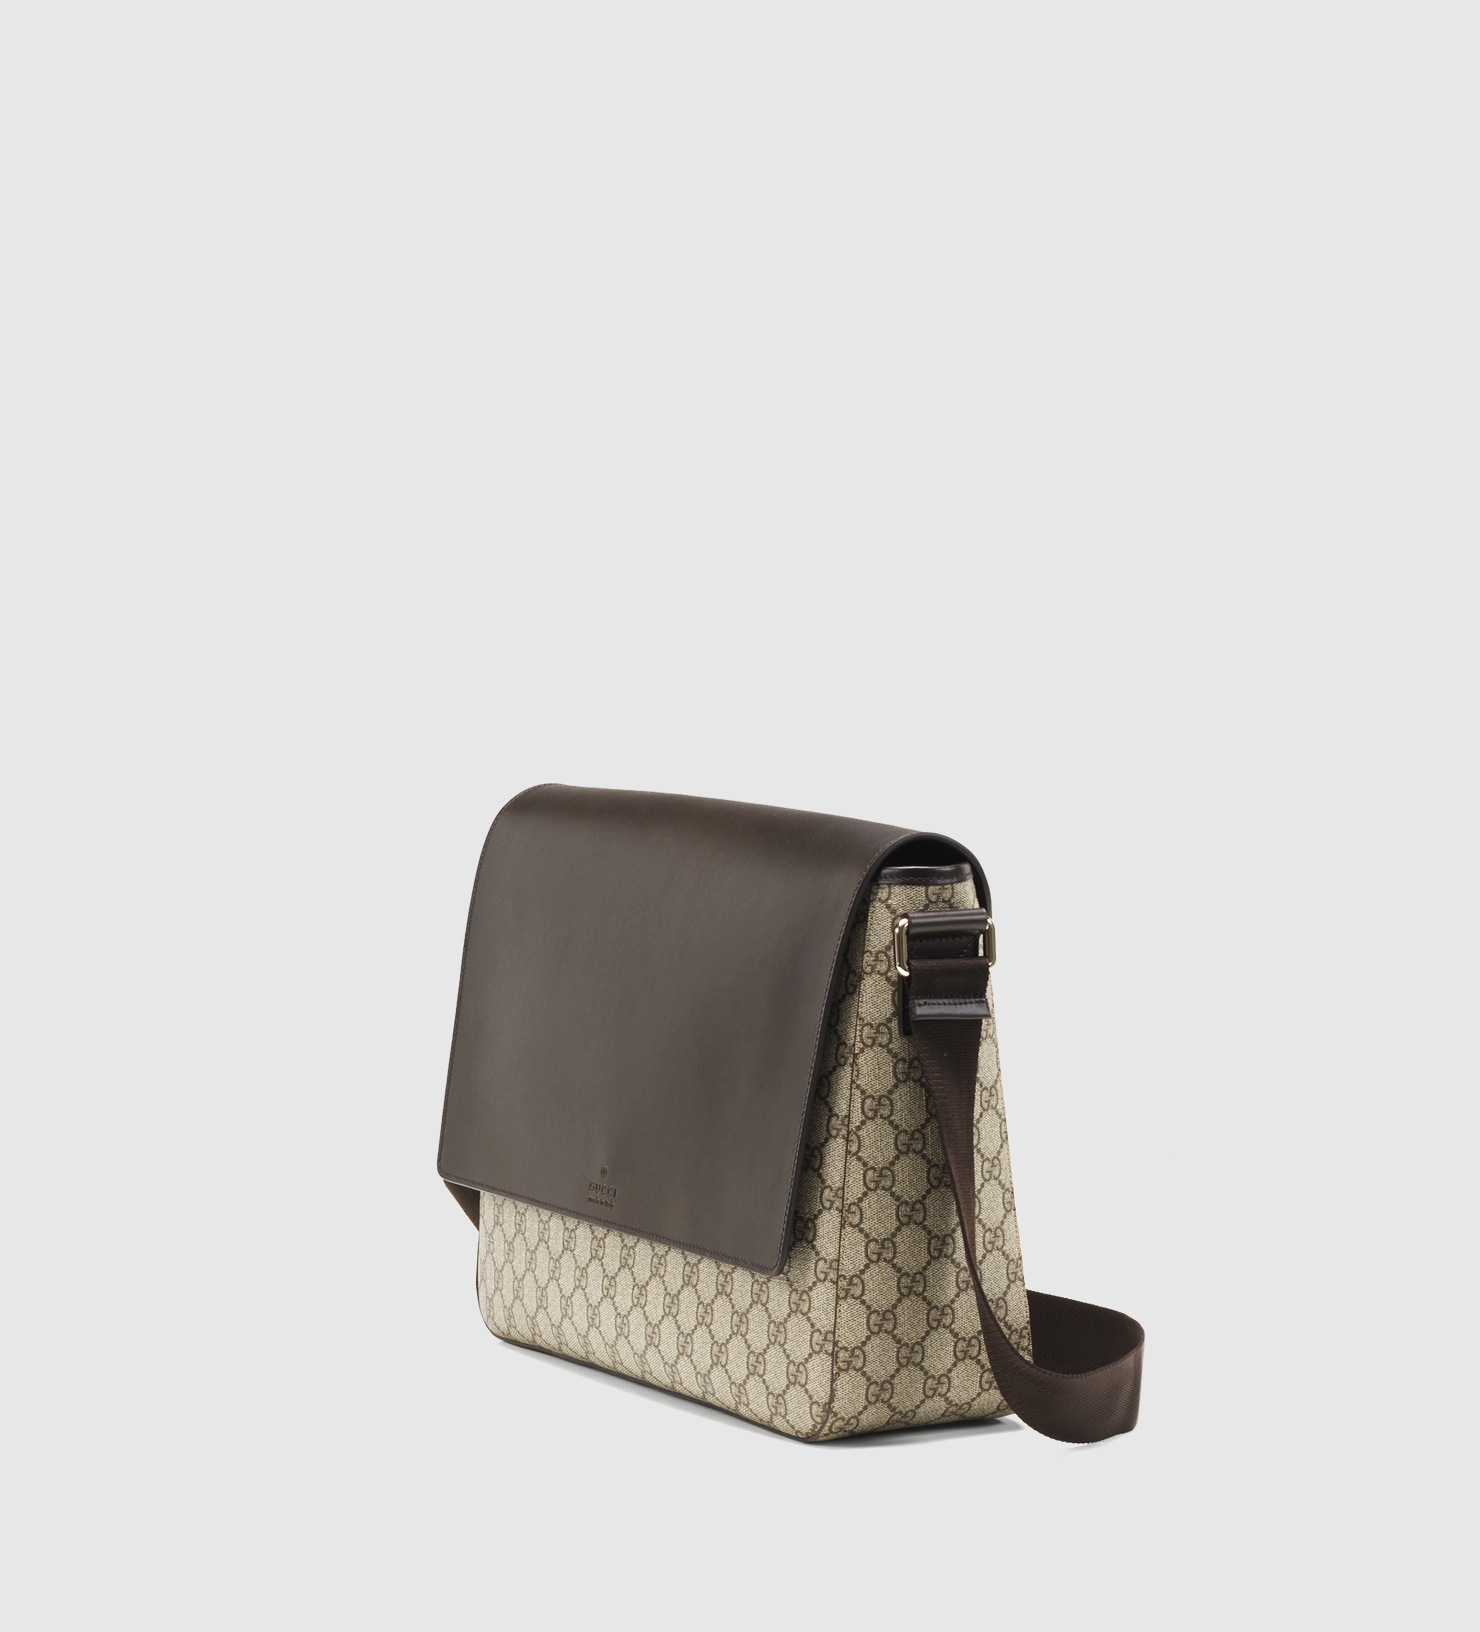 Gucci Gg Supreme Canvas Messenger Bag in Brown - Lyst